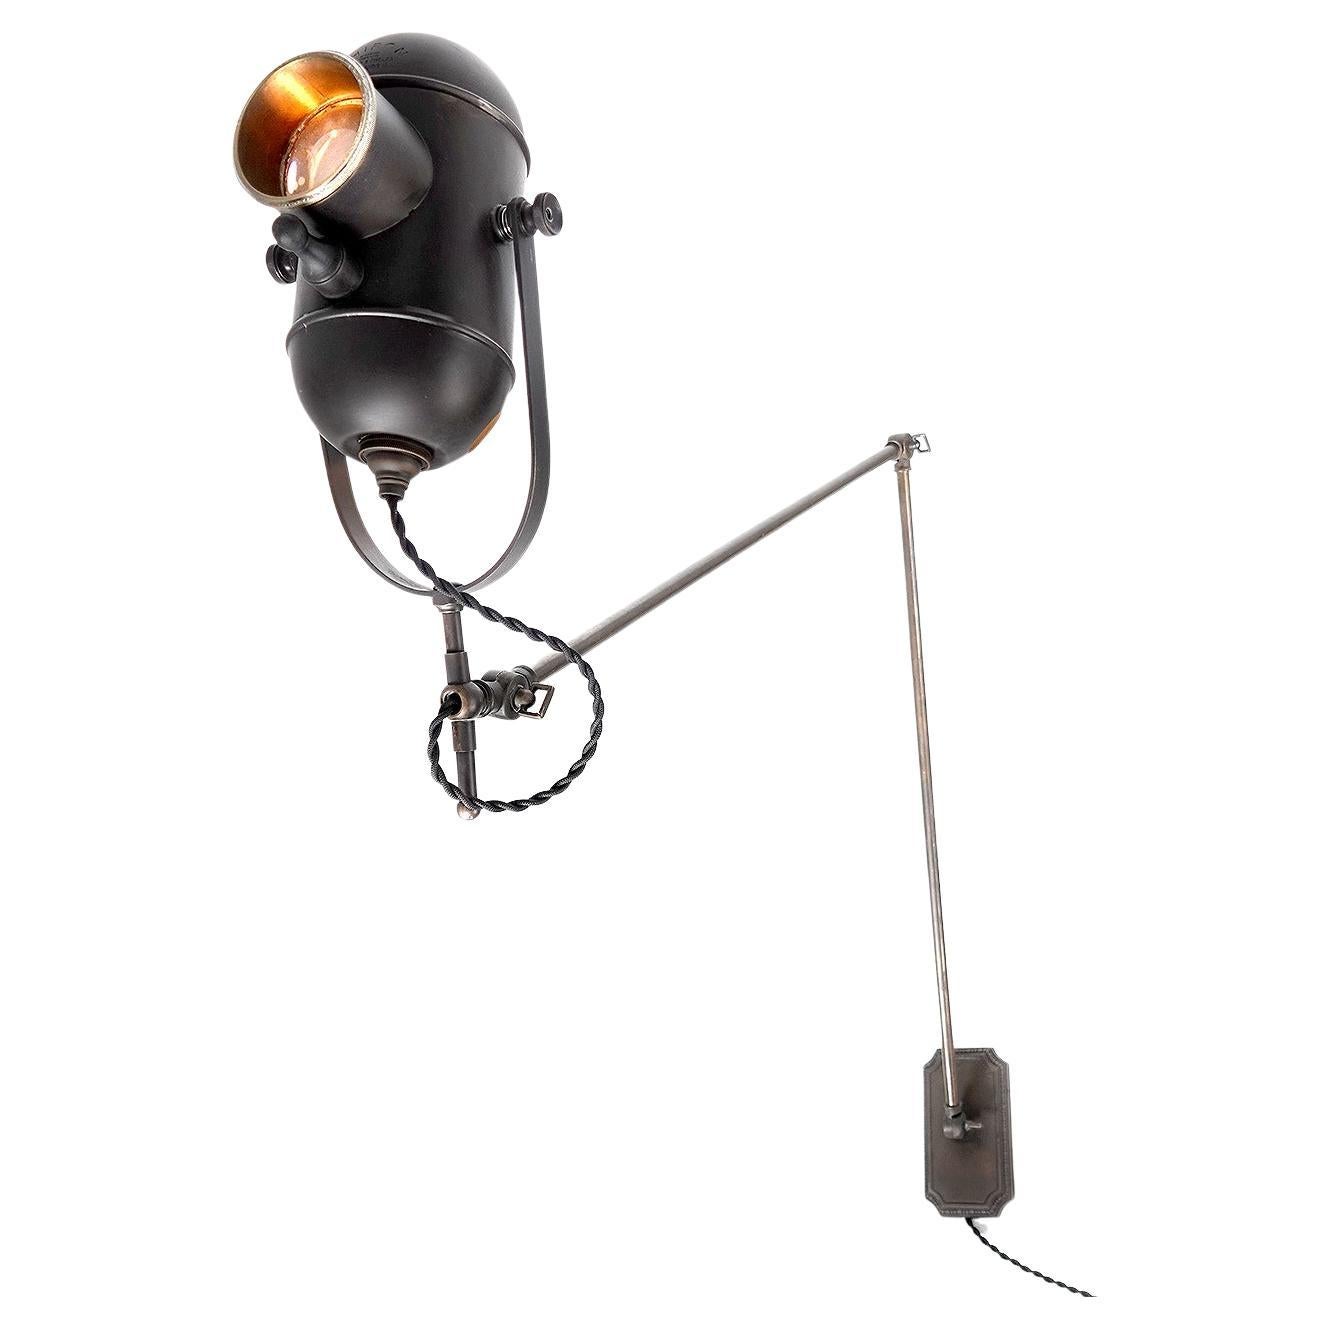 This original early medical examination lamp is signed Chiron London. We took the original fixture head and converted it into a one of a kind articulating wall lamp. It has a long reach and a unique look.